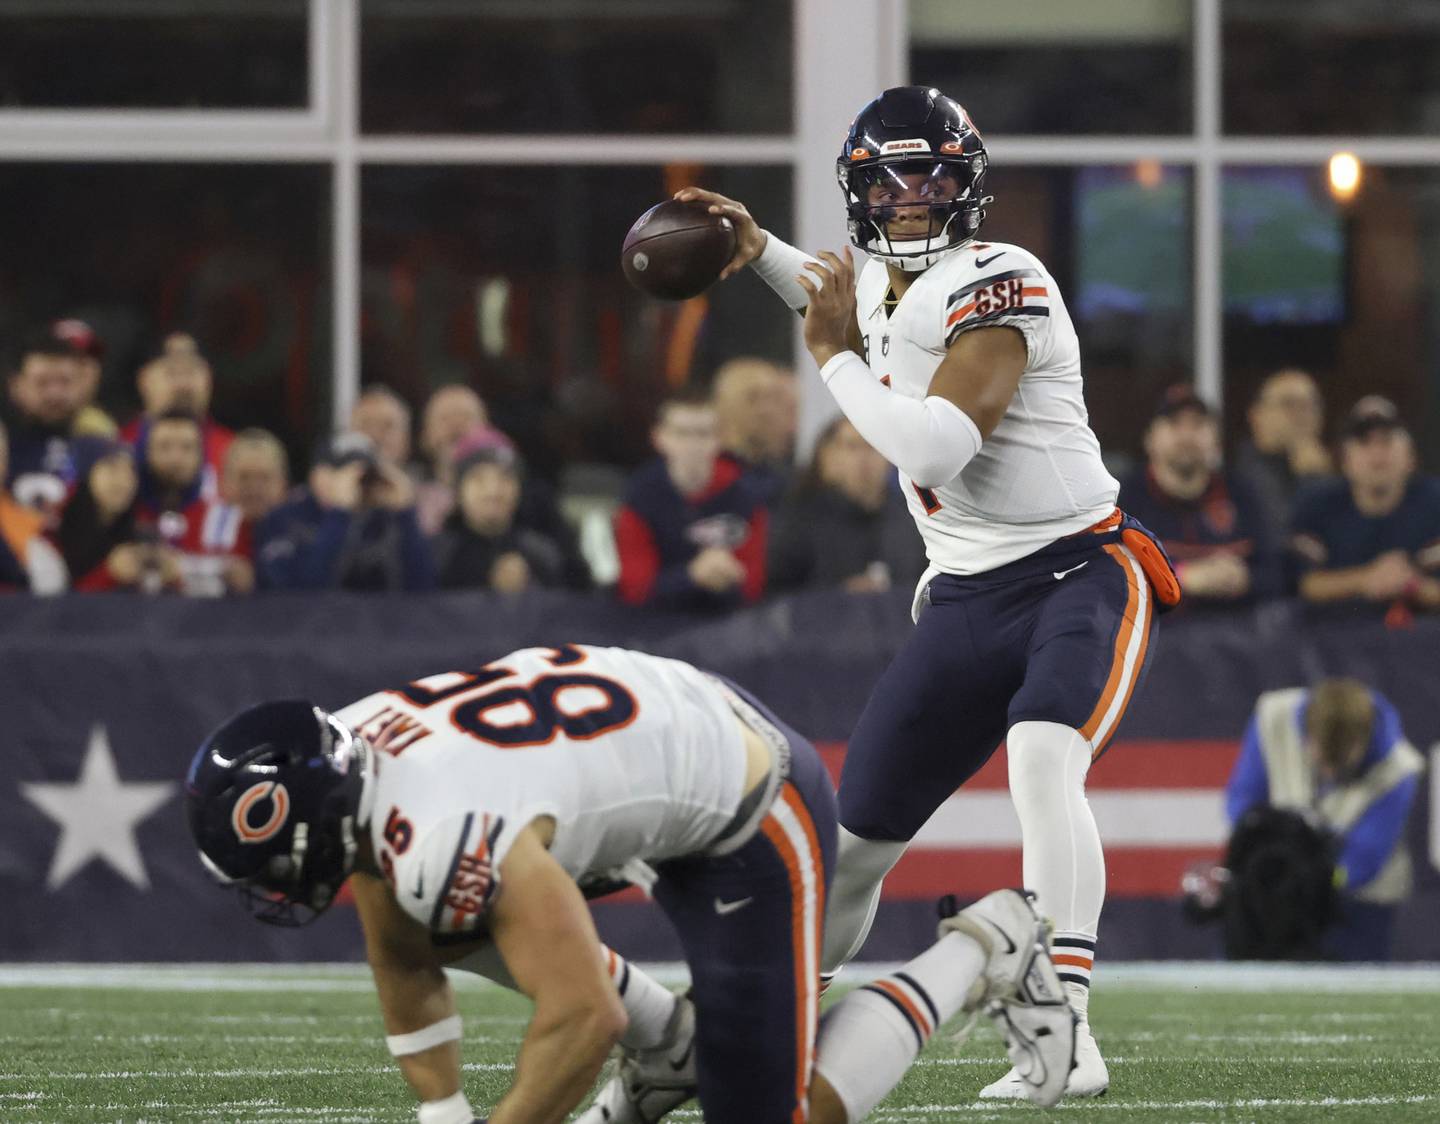 Bears quarterback Justin Fields winds up for a pass attempt in the second quarter against the Patriots on Monday at Gillette Stadium in Foxborough, Mass. 